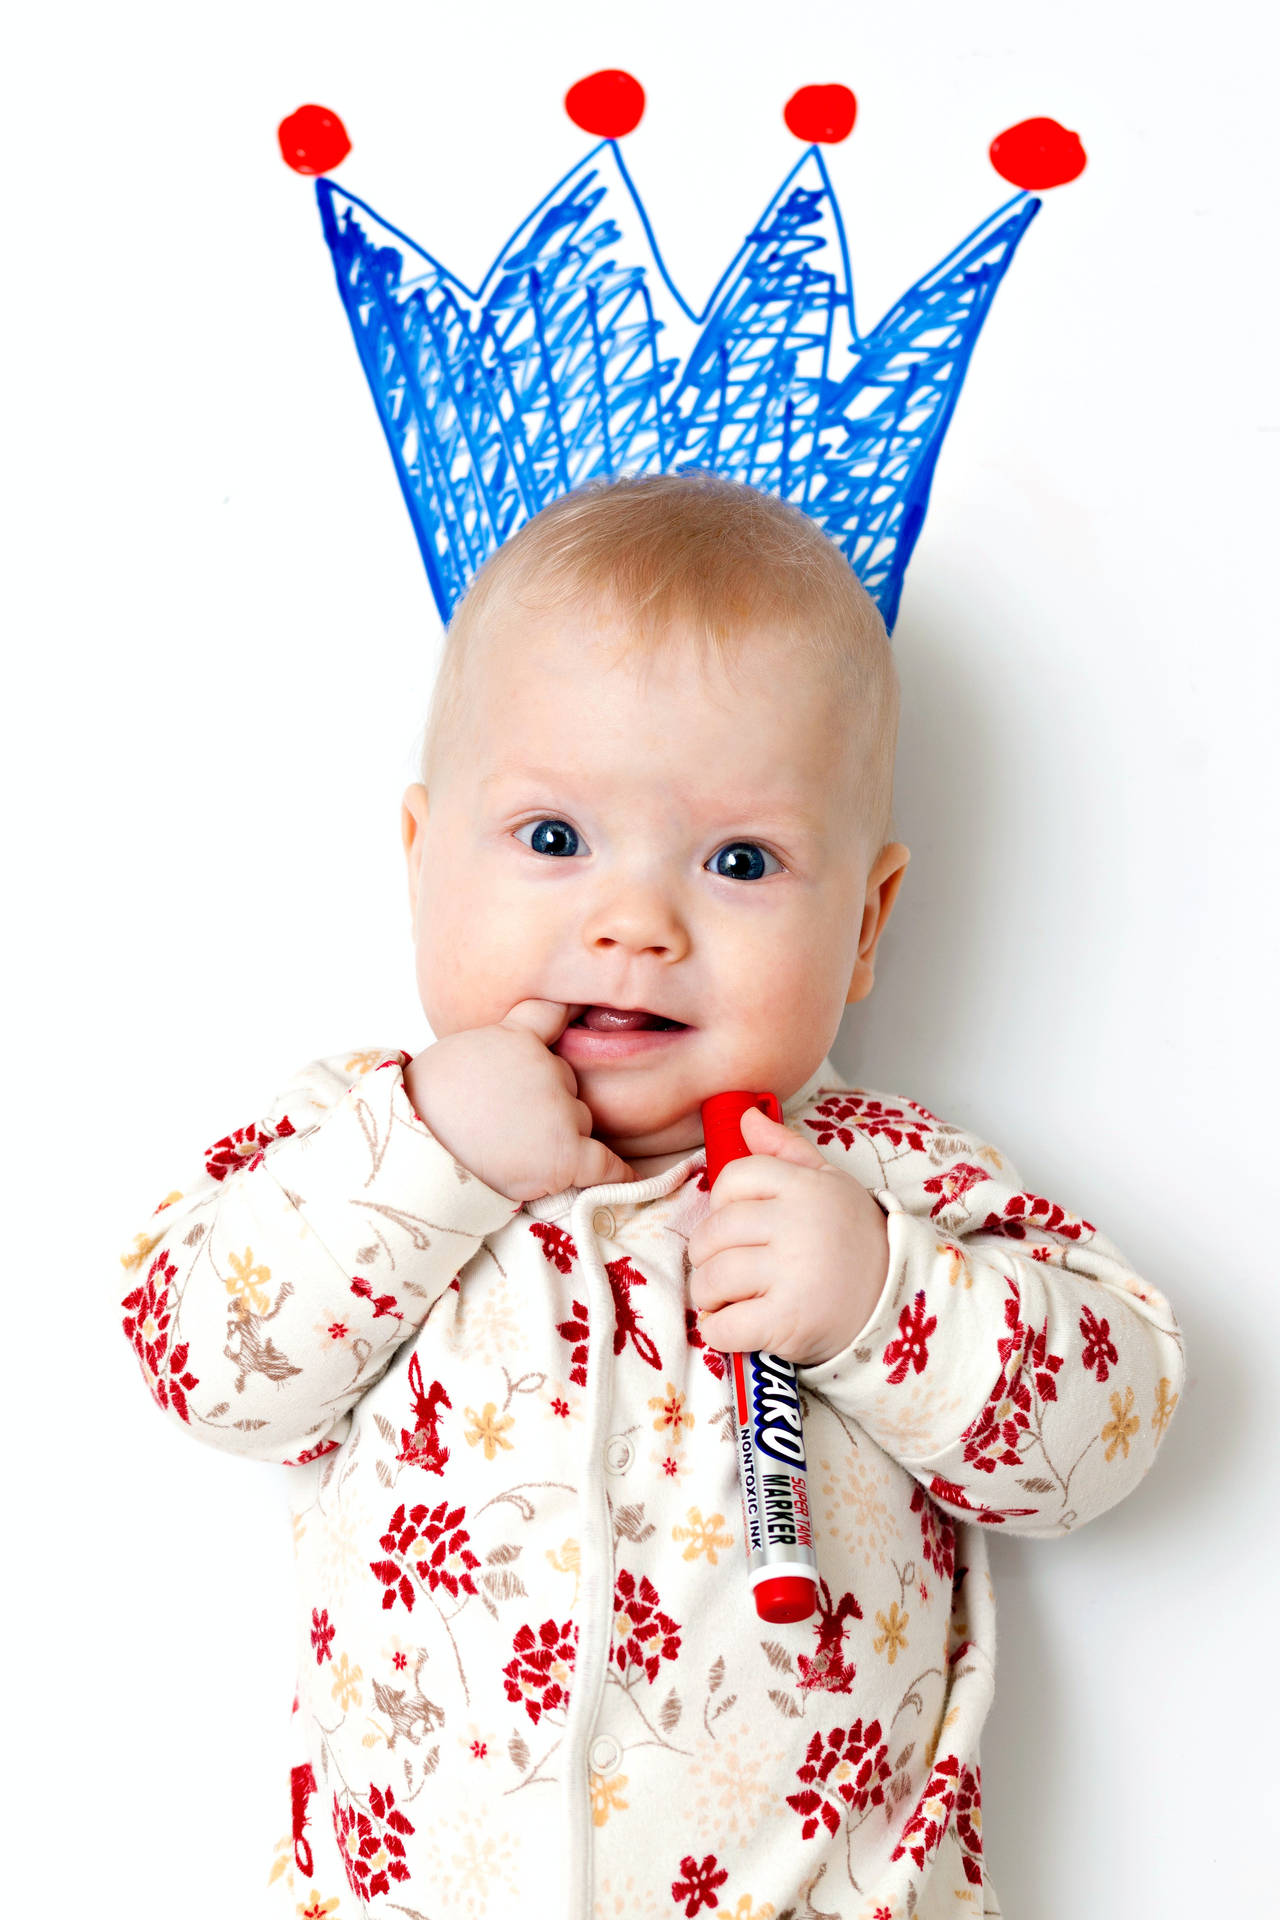 Cute Baby Portrait With Blue Crown Doodle Background